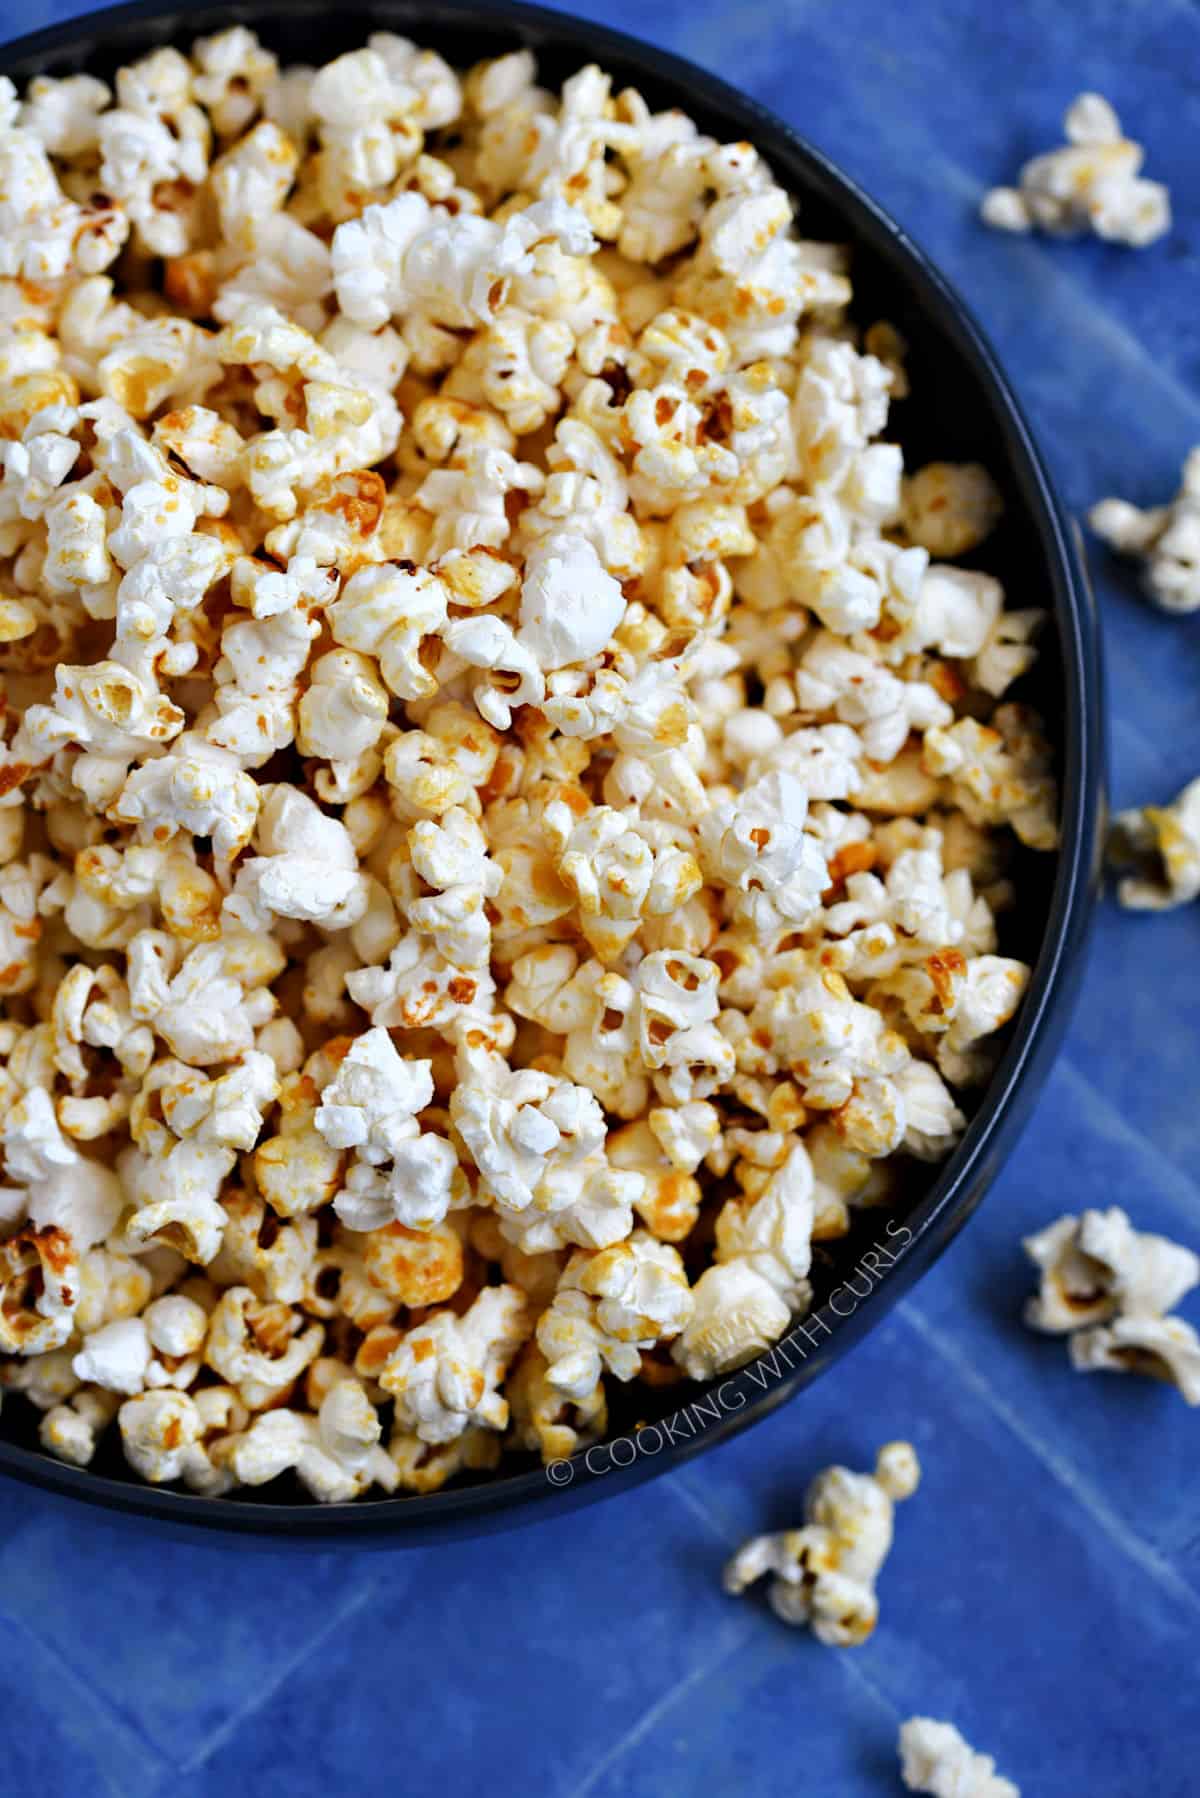 A close-up image of a bowl full of kettle corn popcorn sitting on a blue tile background.